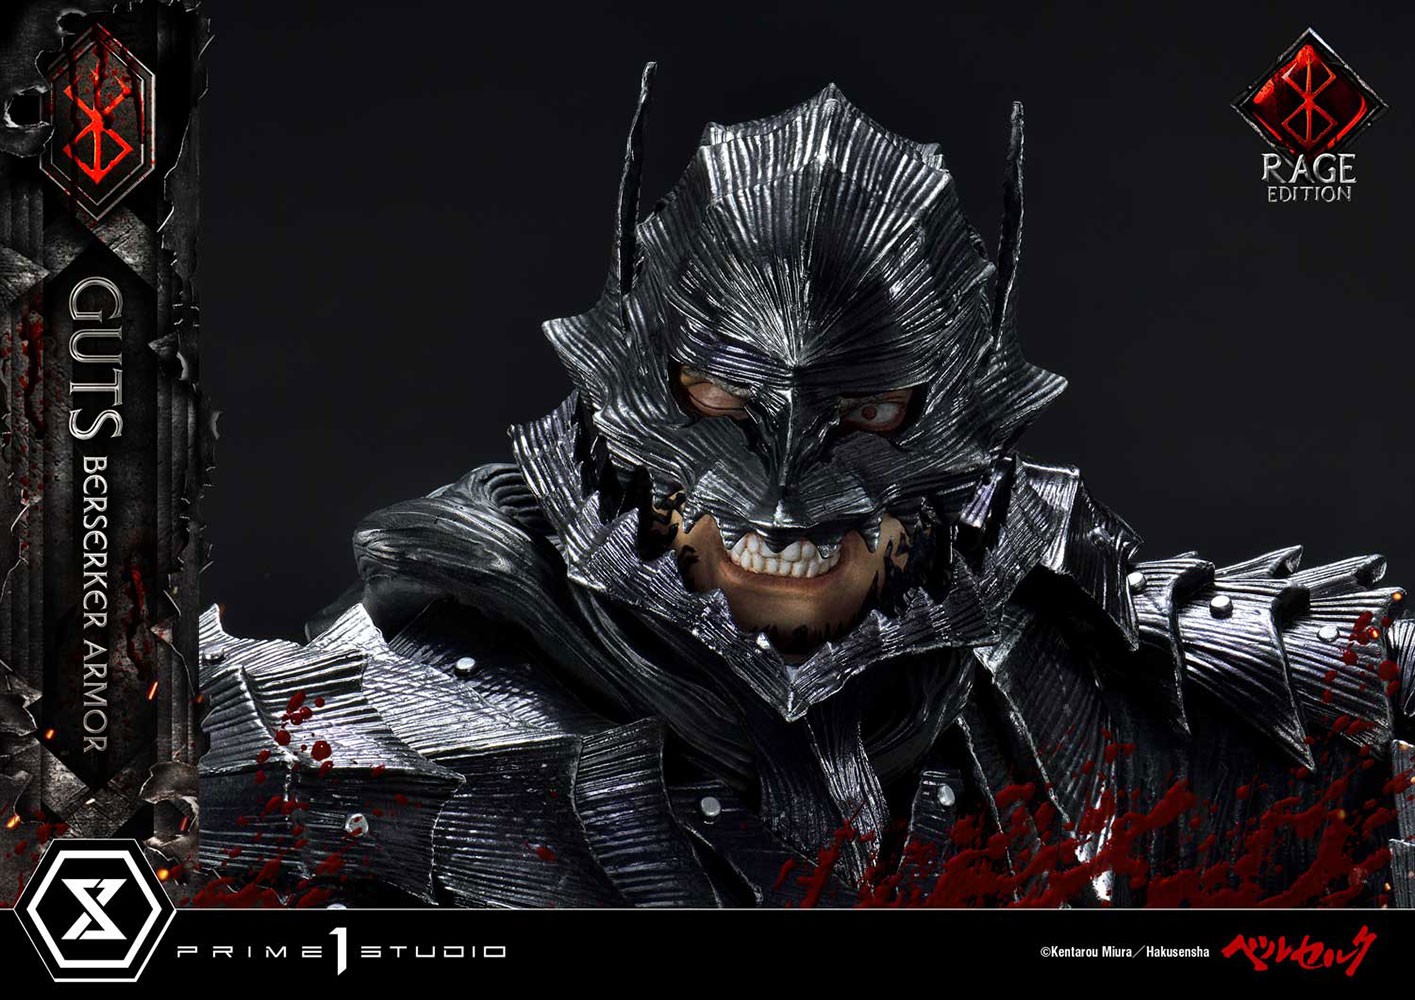 Guts Berserker Armor (Rage Edition) Collector Edition (Prototype Shown) View 37